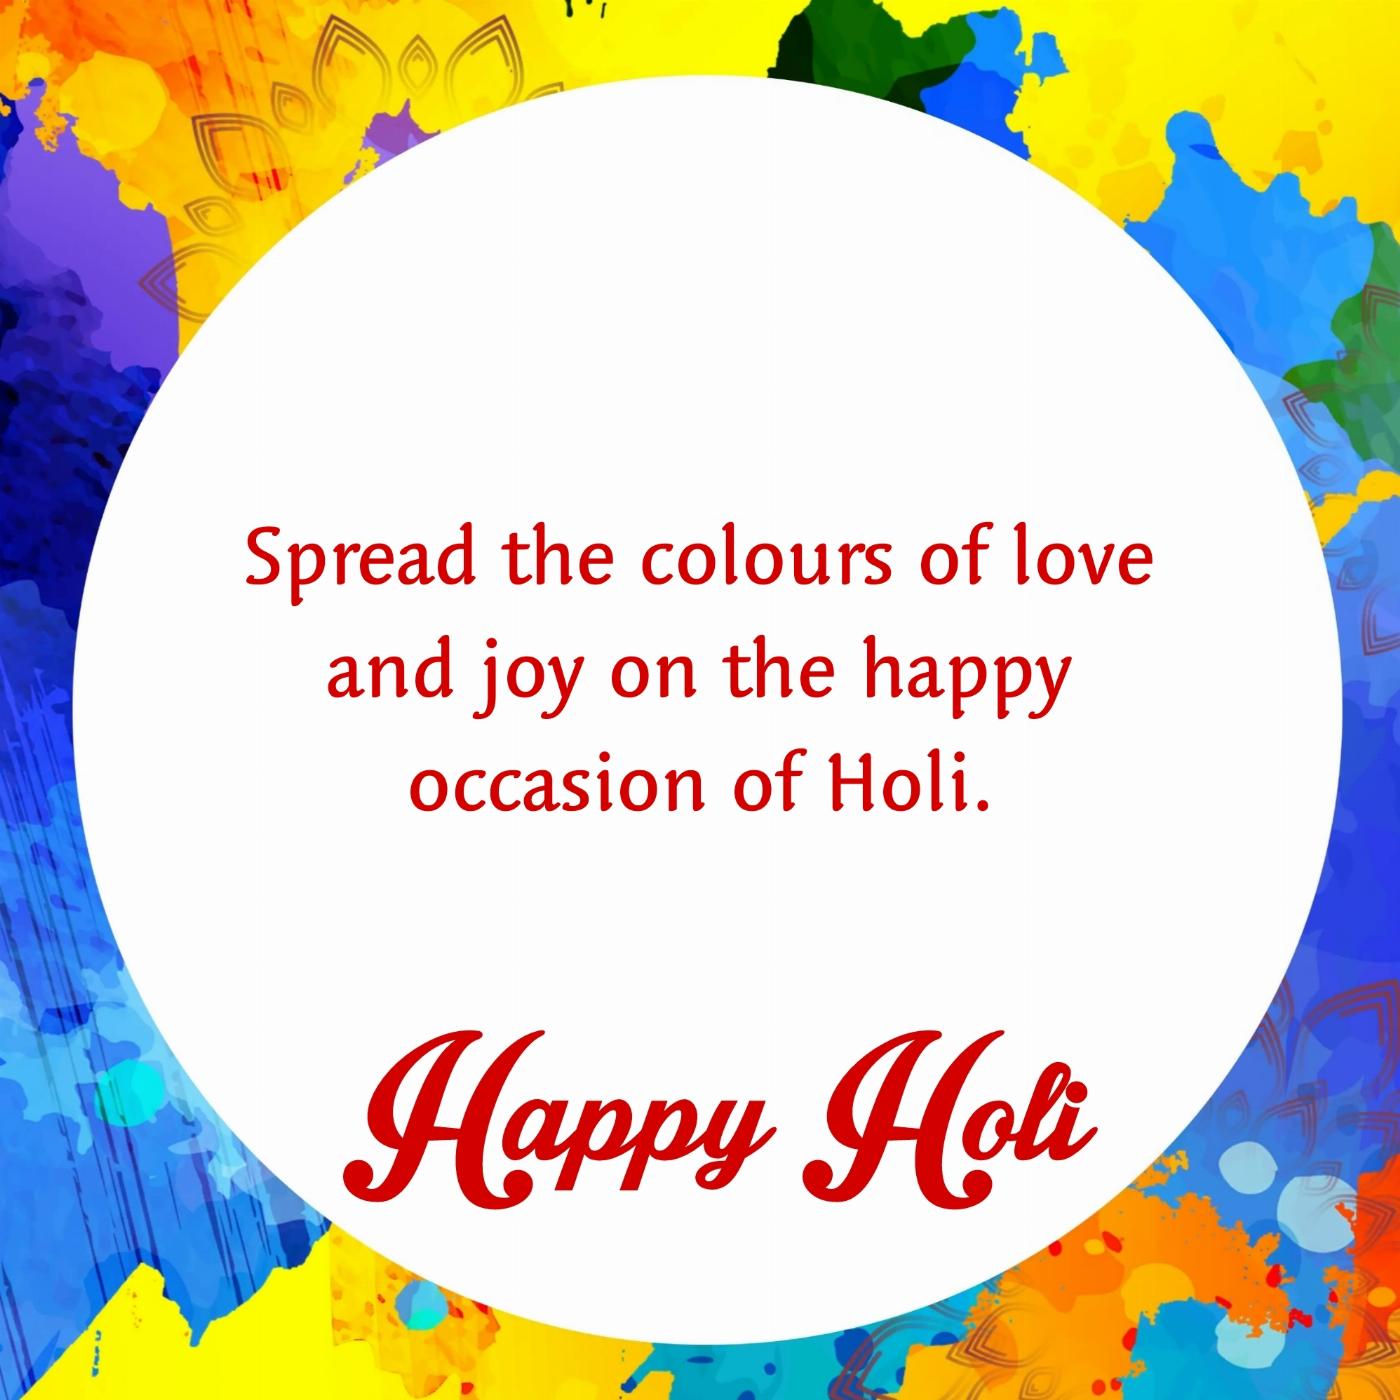 Spread the colours of love and joy on the happy occasion of Holi